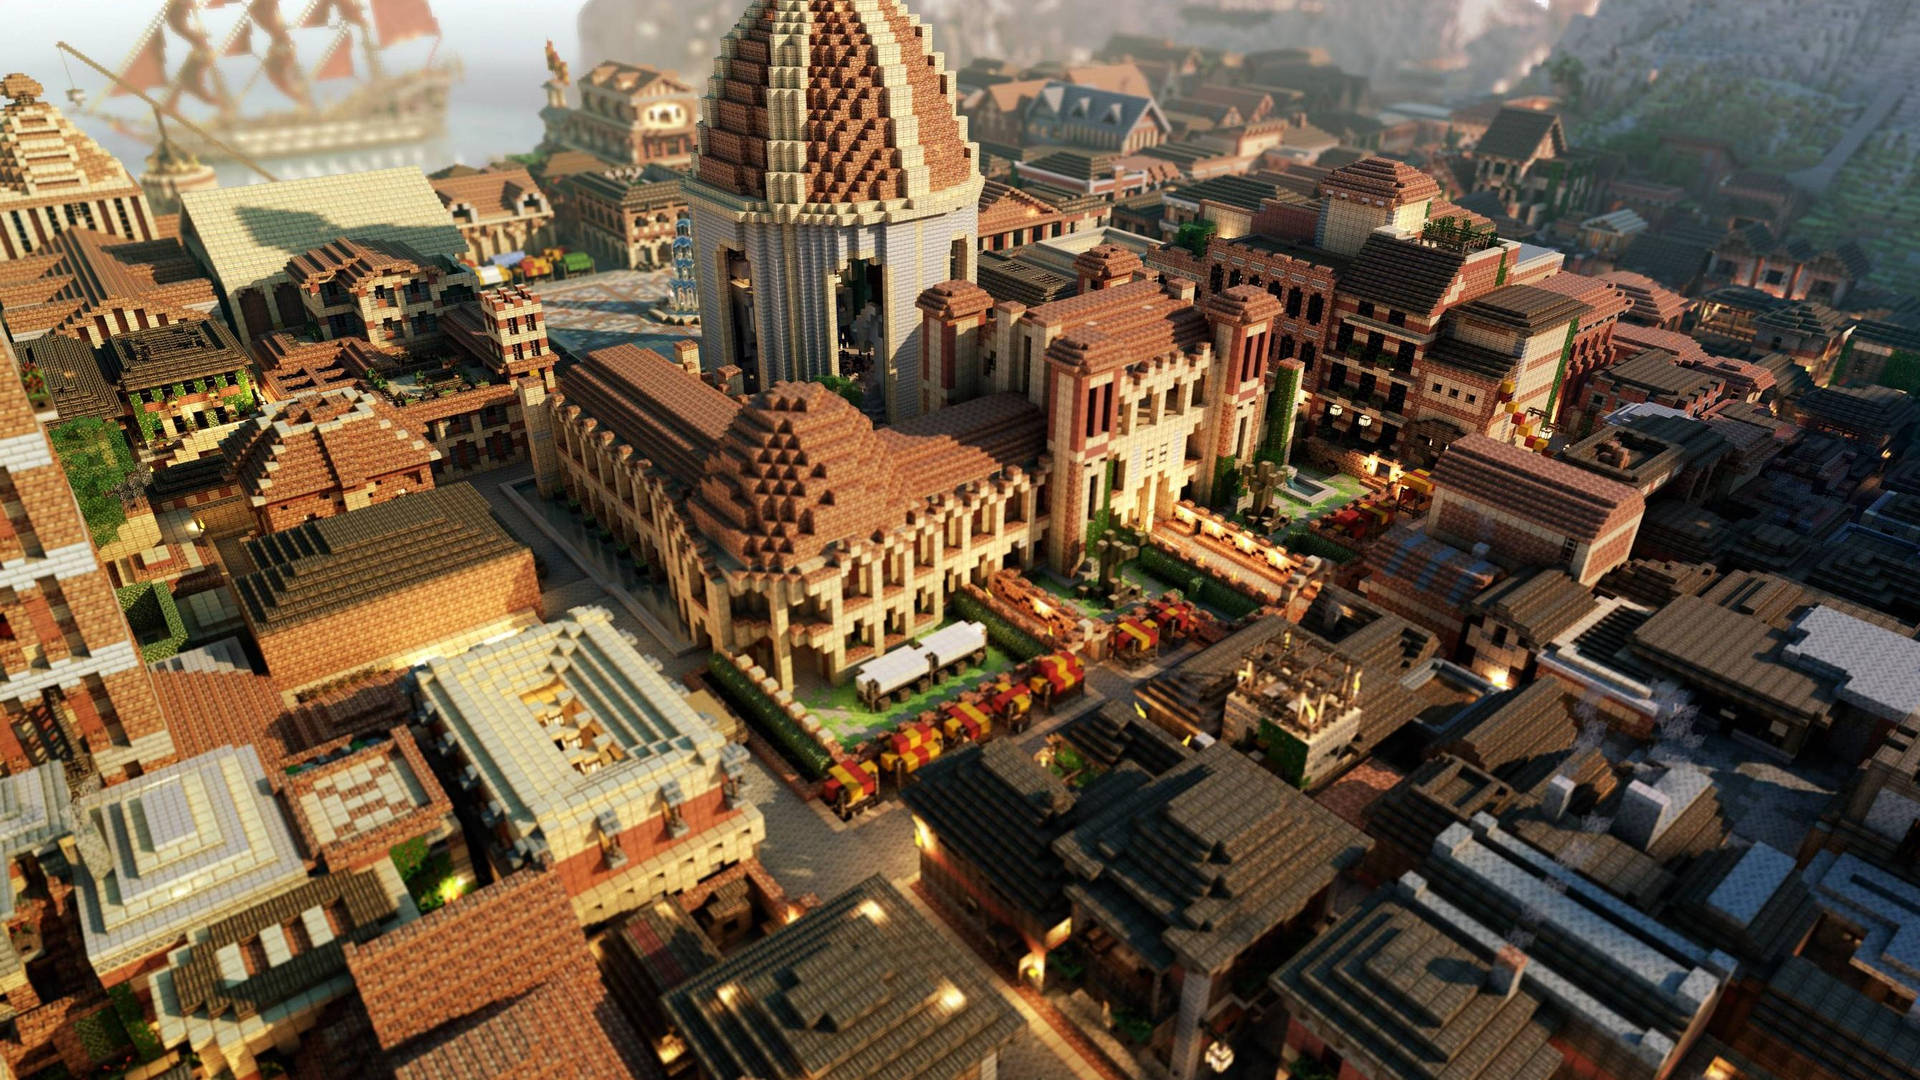 Explore The Mystical Medieval City Of Minecraft